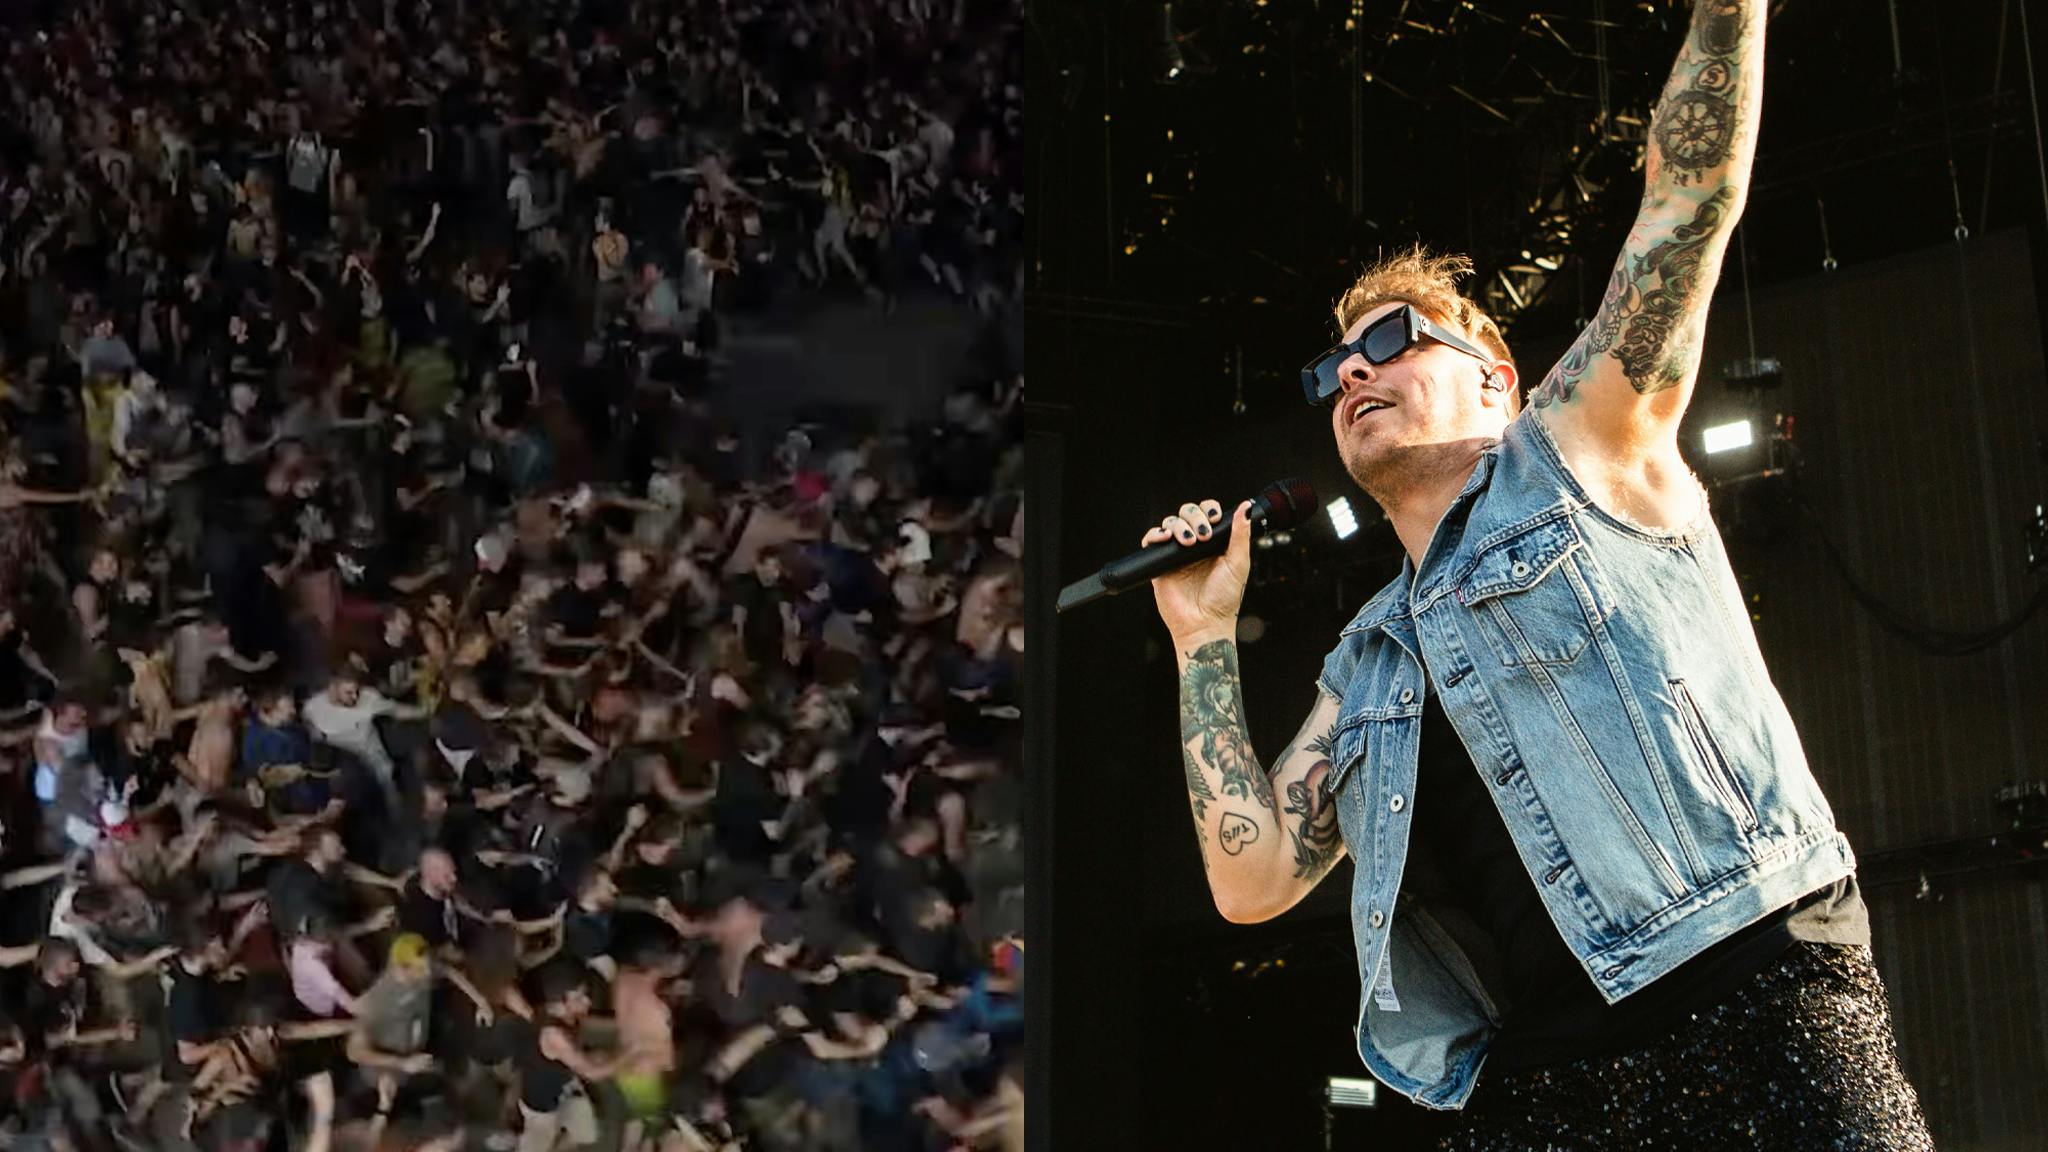 Architects share footage of their astonishing circle-pits at Hellfest